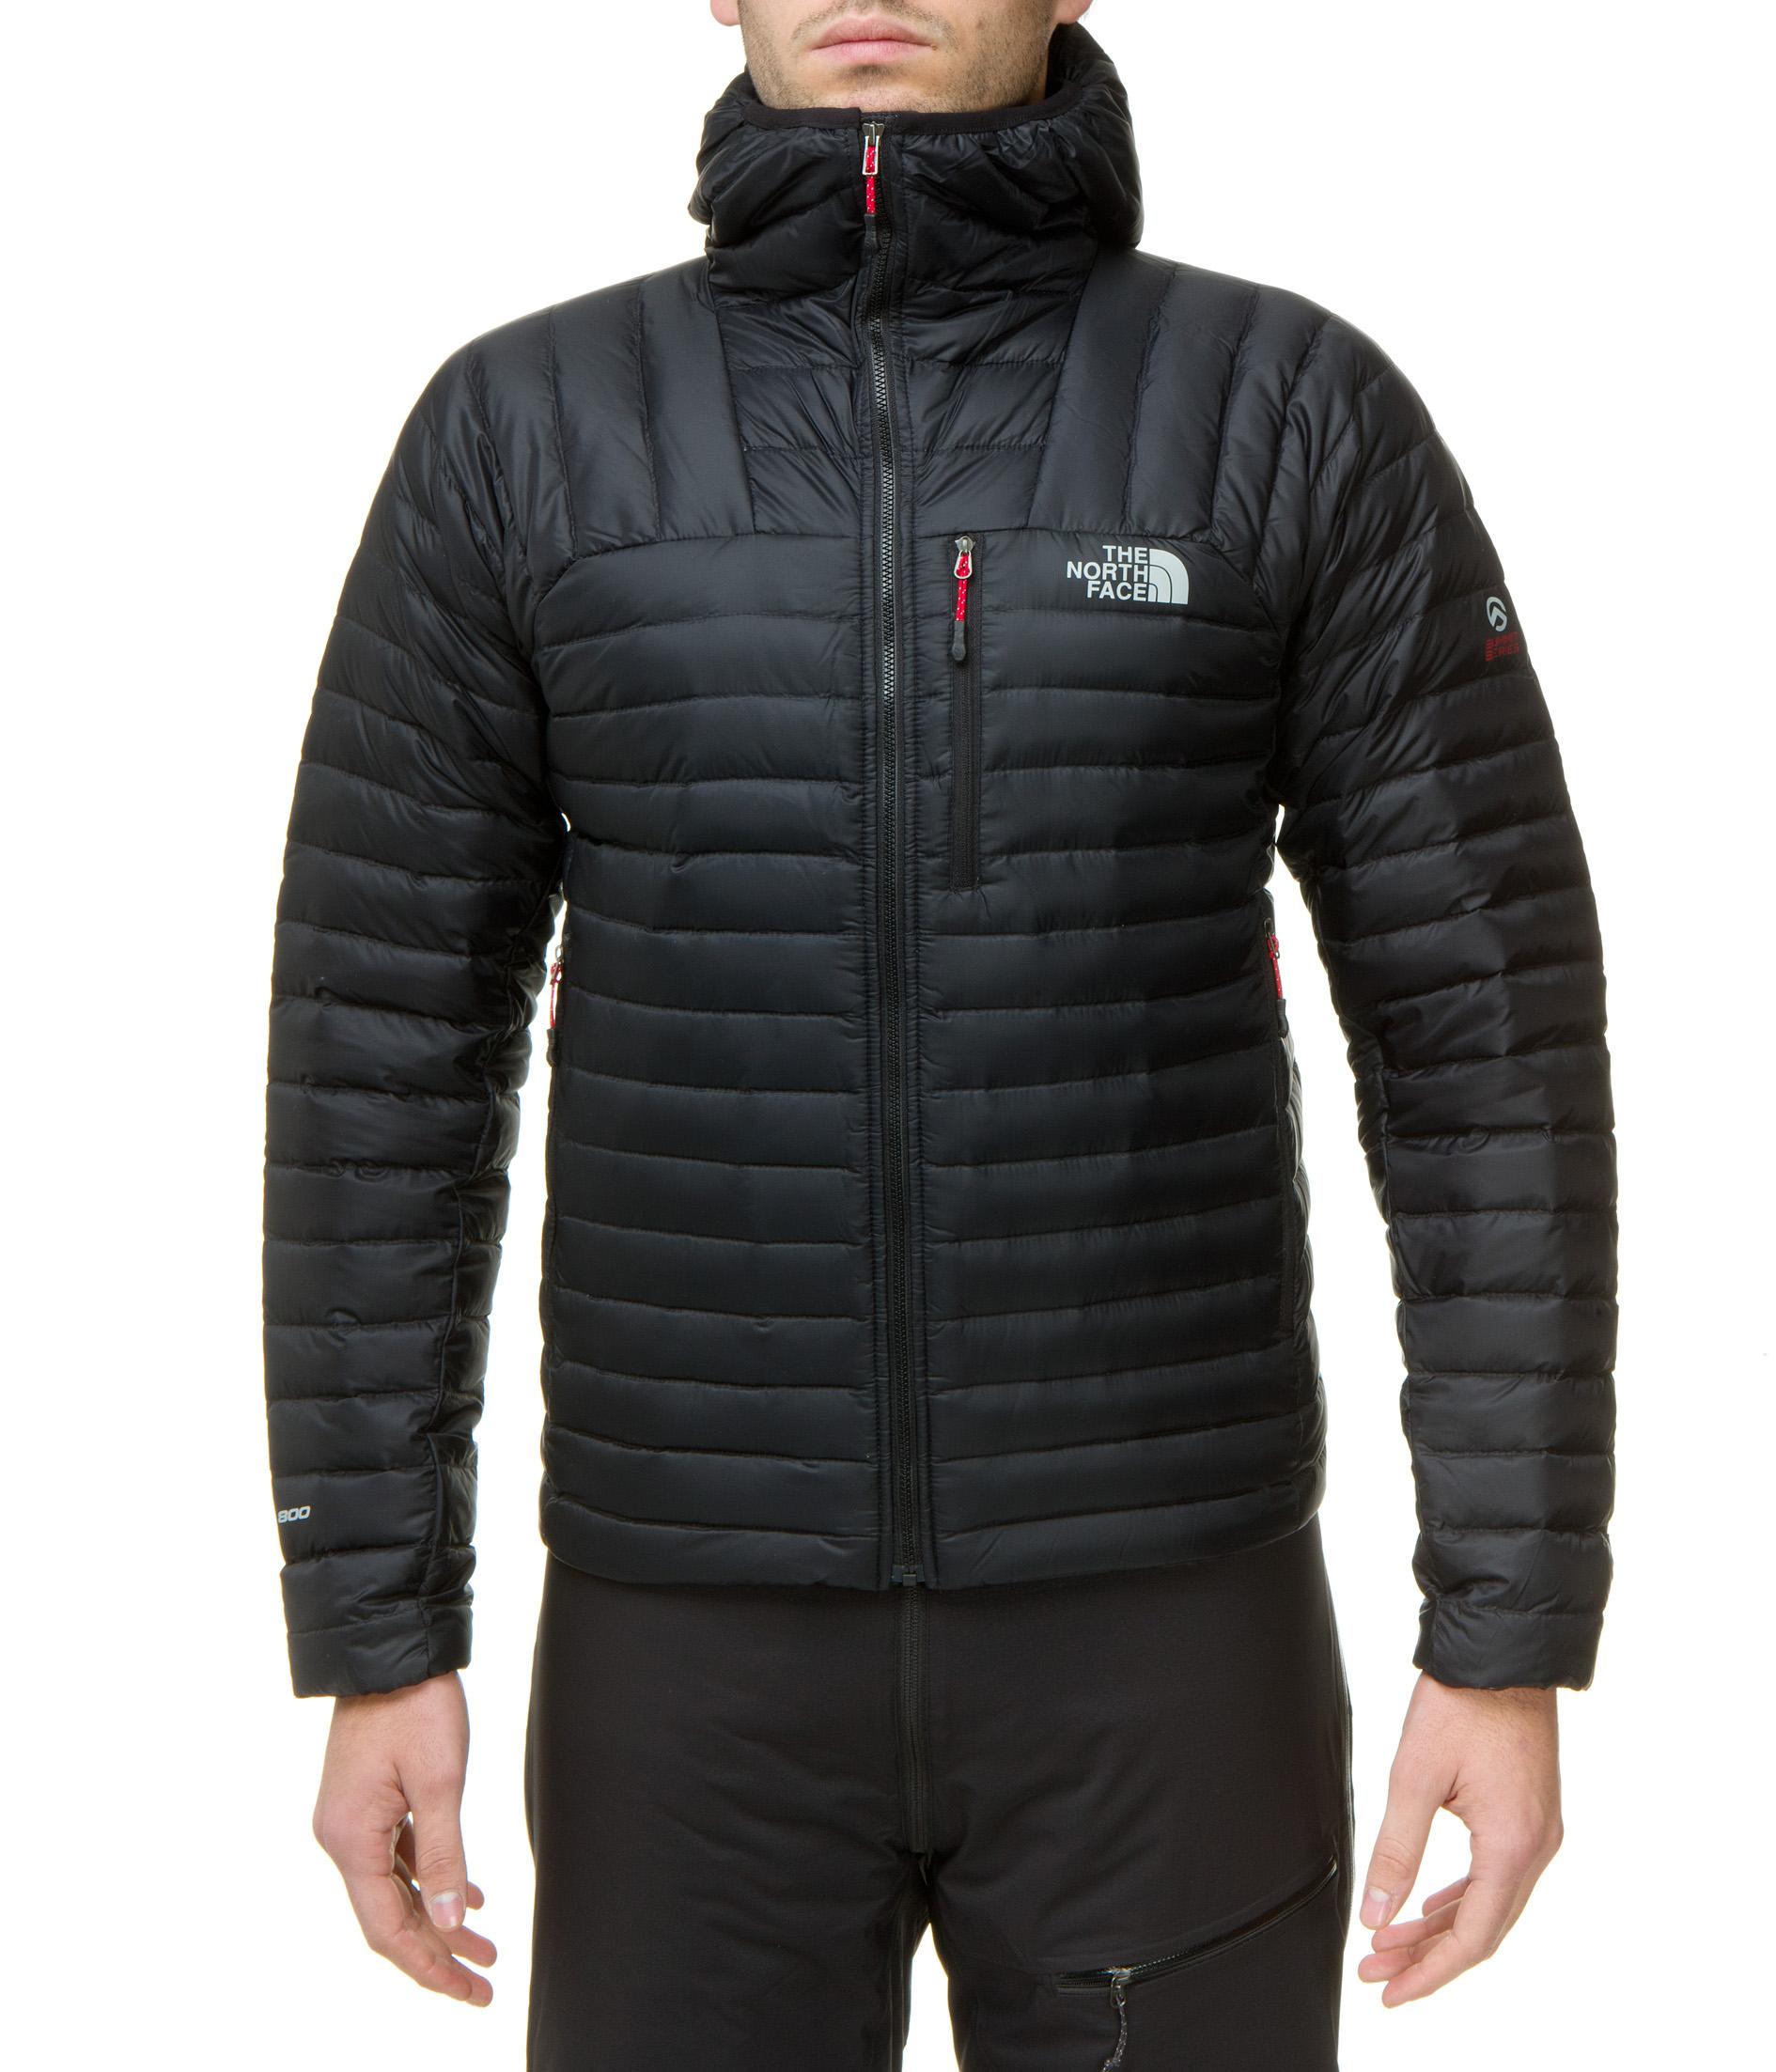 Foto The North Face Men's Catalyst Micro Jacket